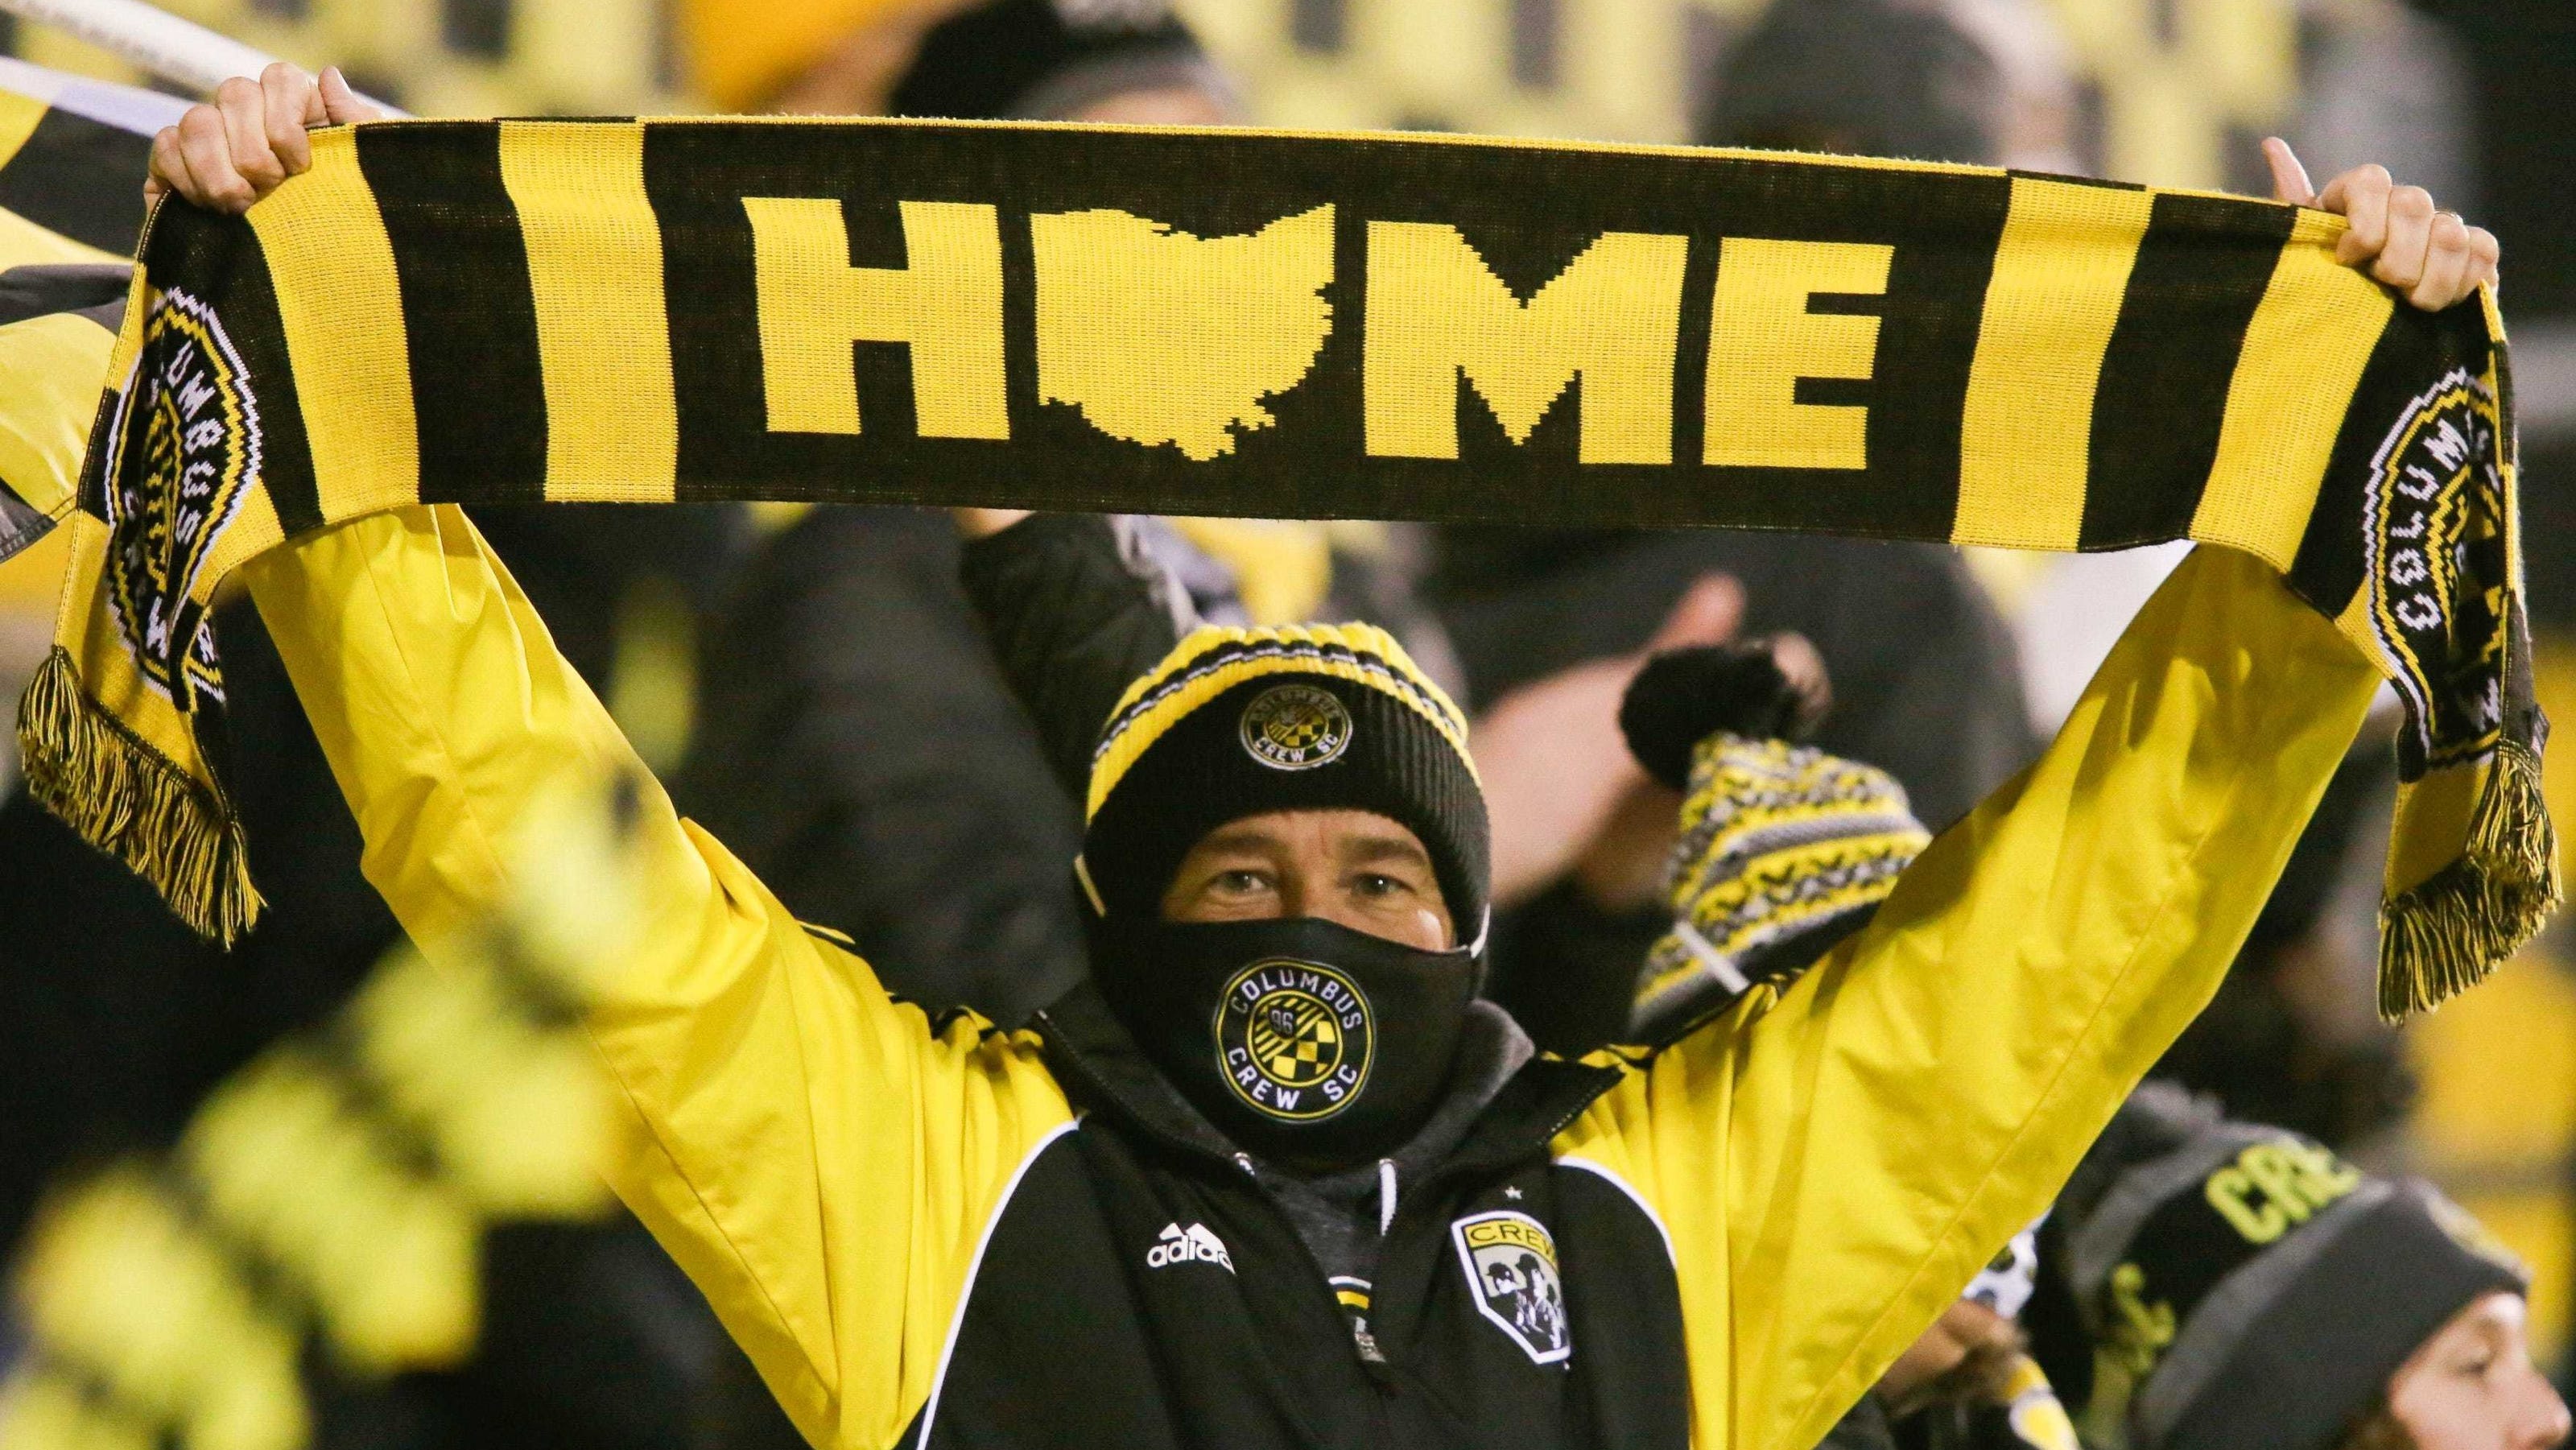 Columbus Crew: 2021 schedule and results